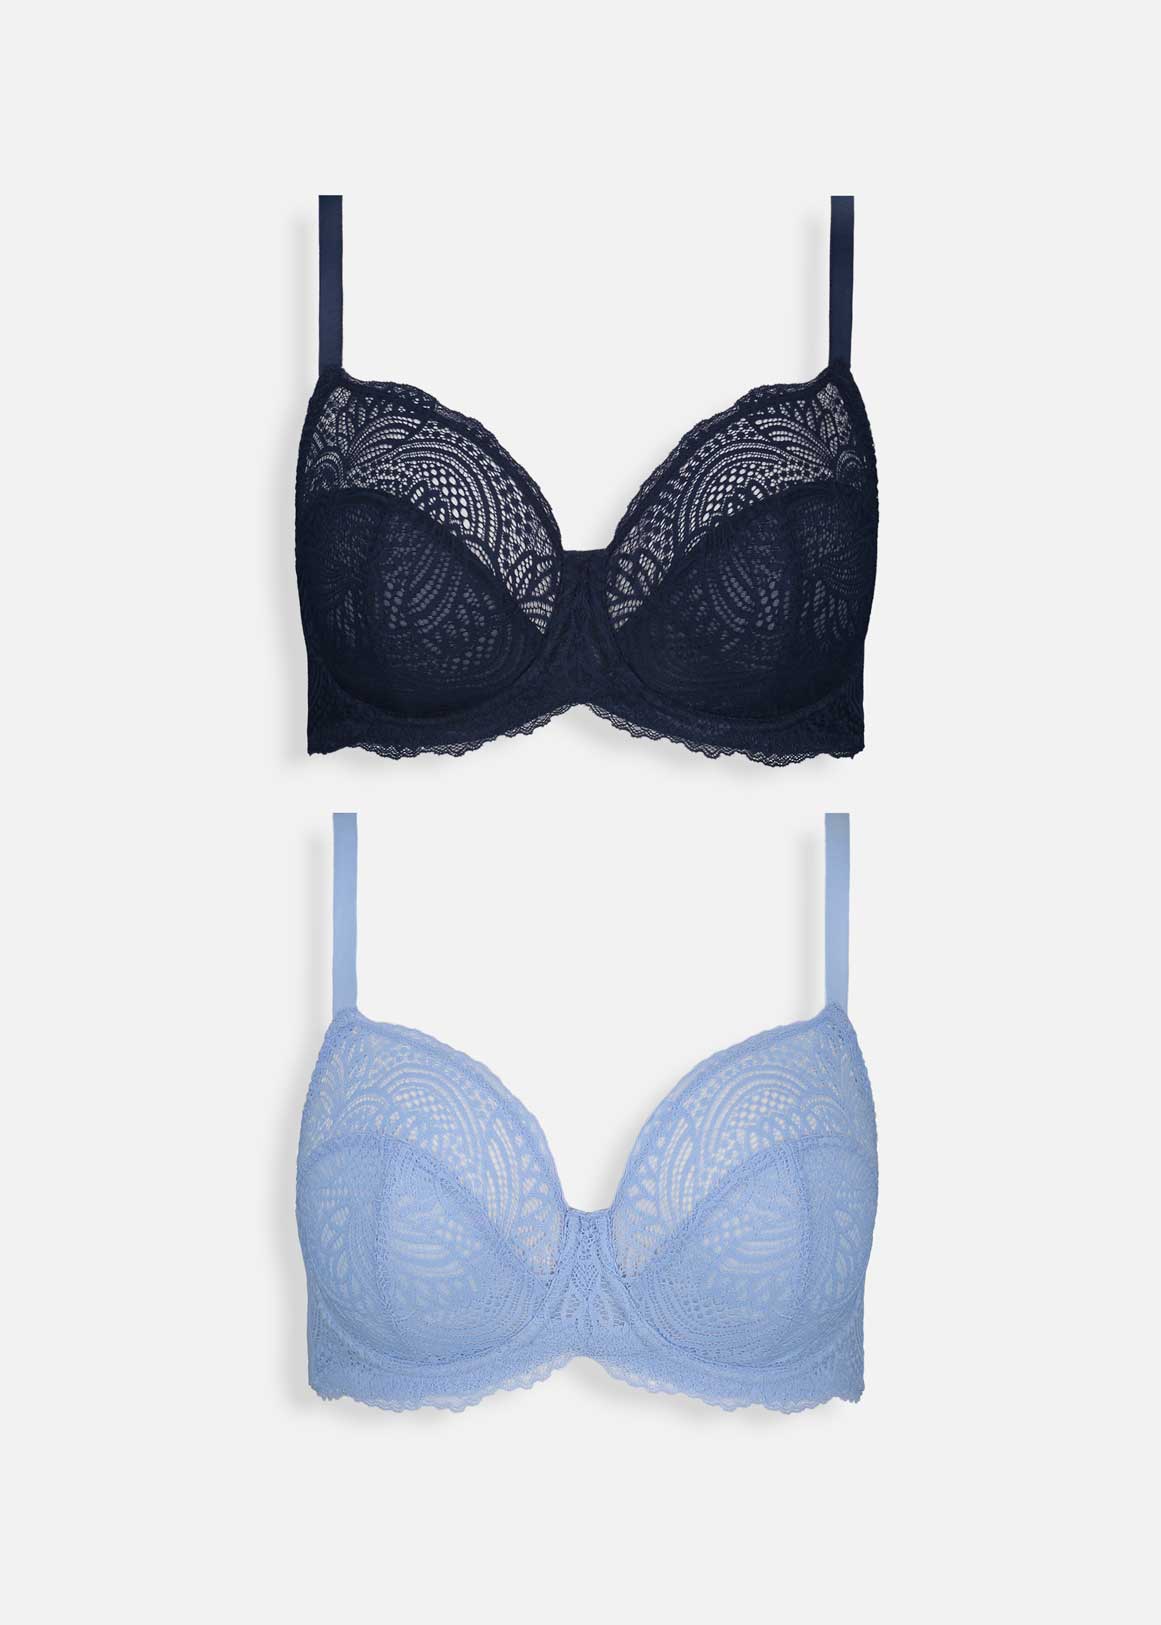 DD to G Cup Bras